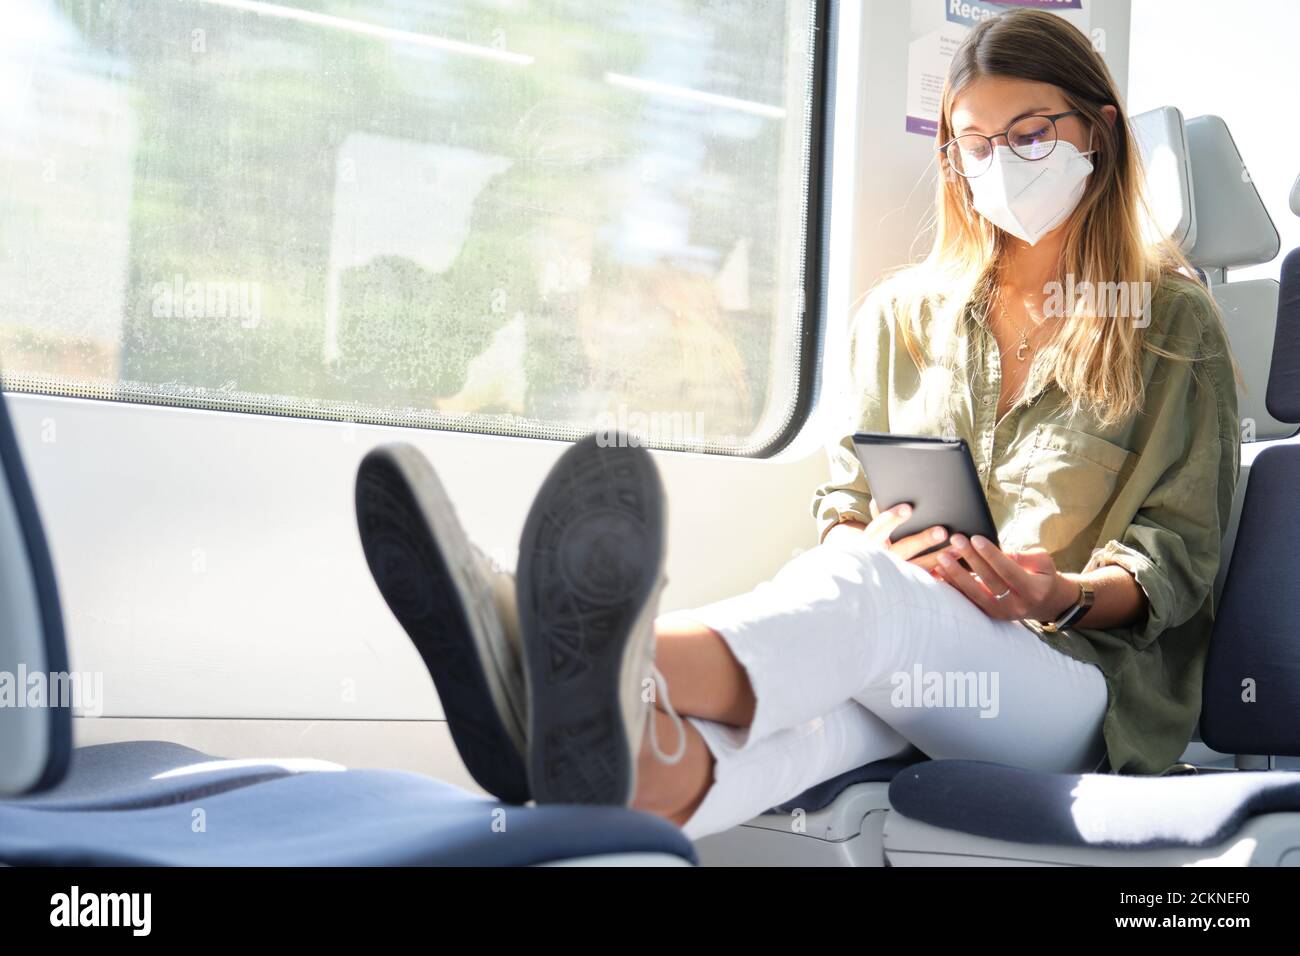 Young woman wearing face mask and reading a e-book in the train with her feet up. New normal travel concept. Stock Photo